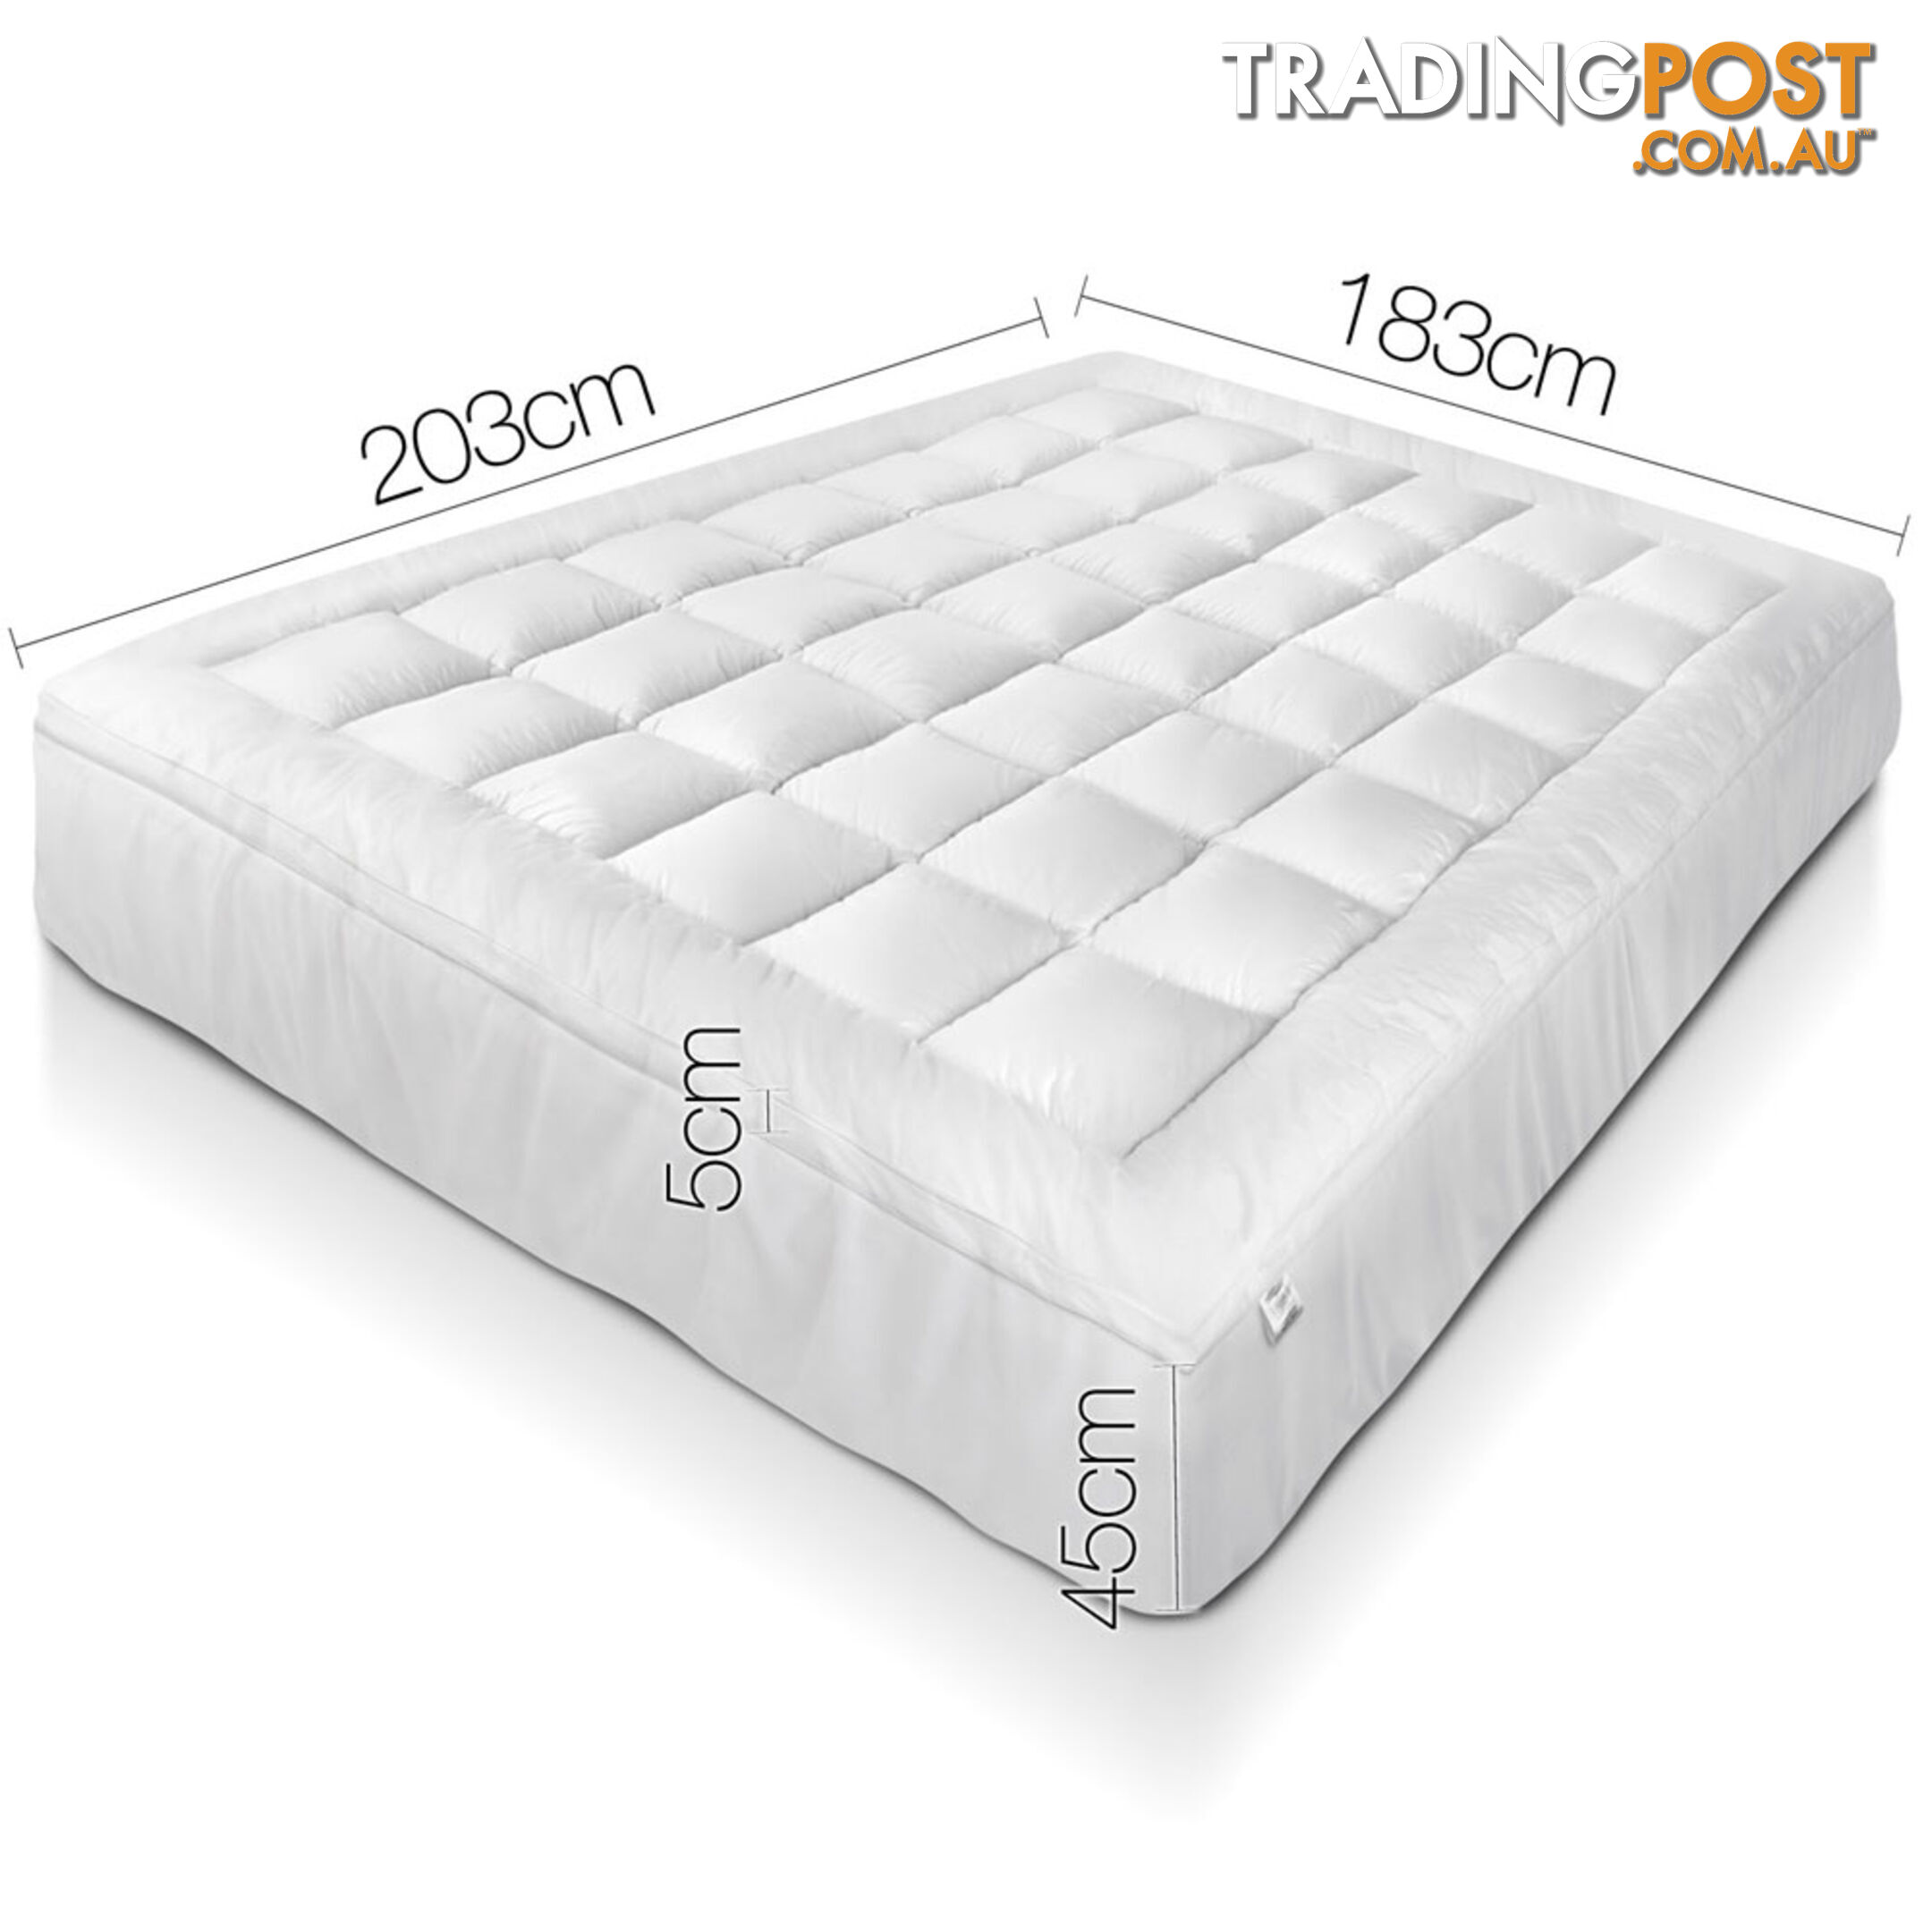 1000GSM Bamboo Fabric Pillowtop Mattress Topper Bed Cover Protector 5cm King